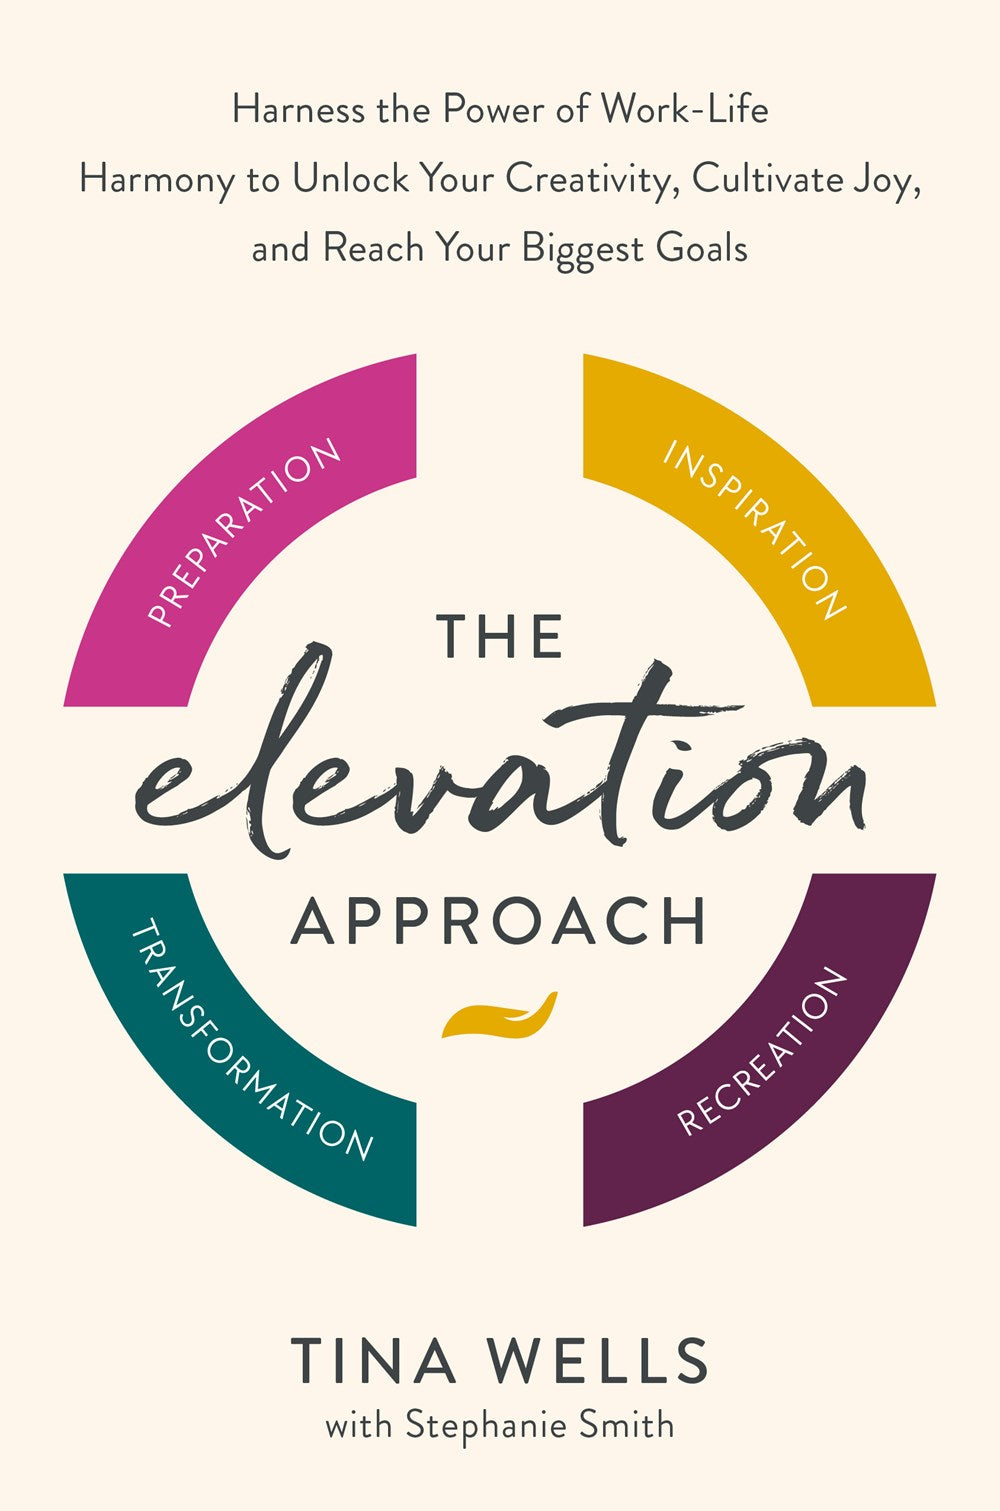 The Elevation Approach: Harness the Power of Work-Life Harmony to Unlock Your Creativity, Cultivate Joy, and Reach Your Biggest Goals by Tina Wells with Stephanie Smith